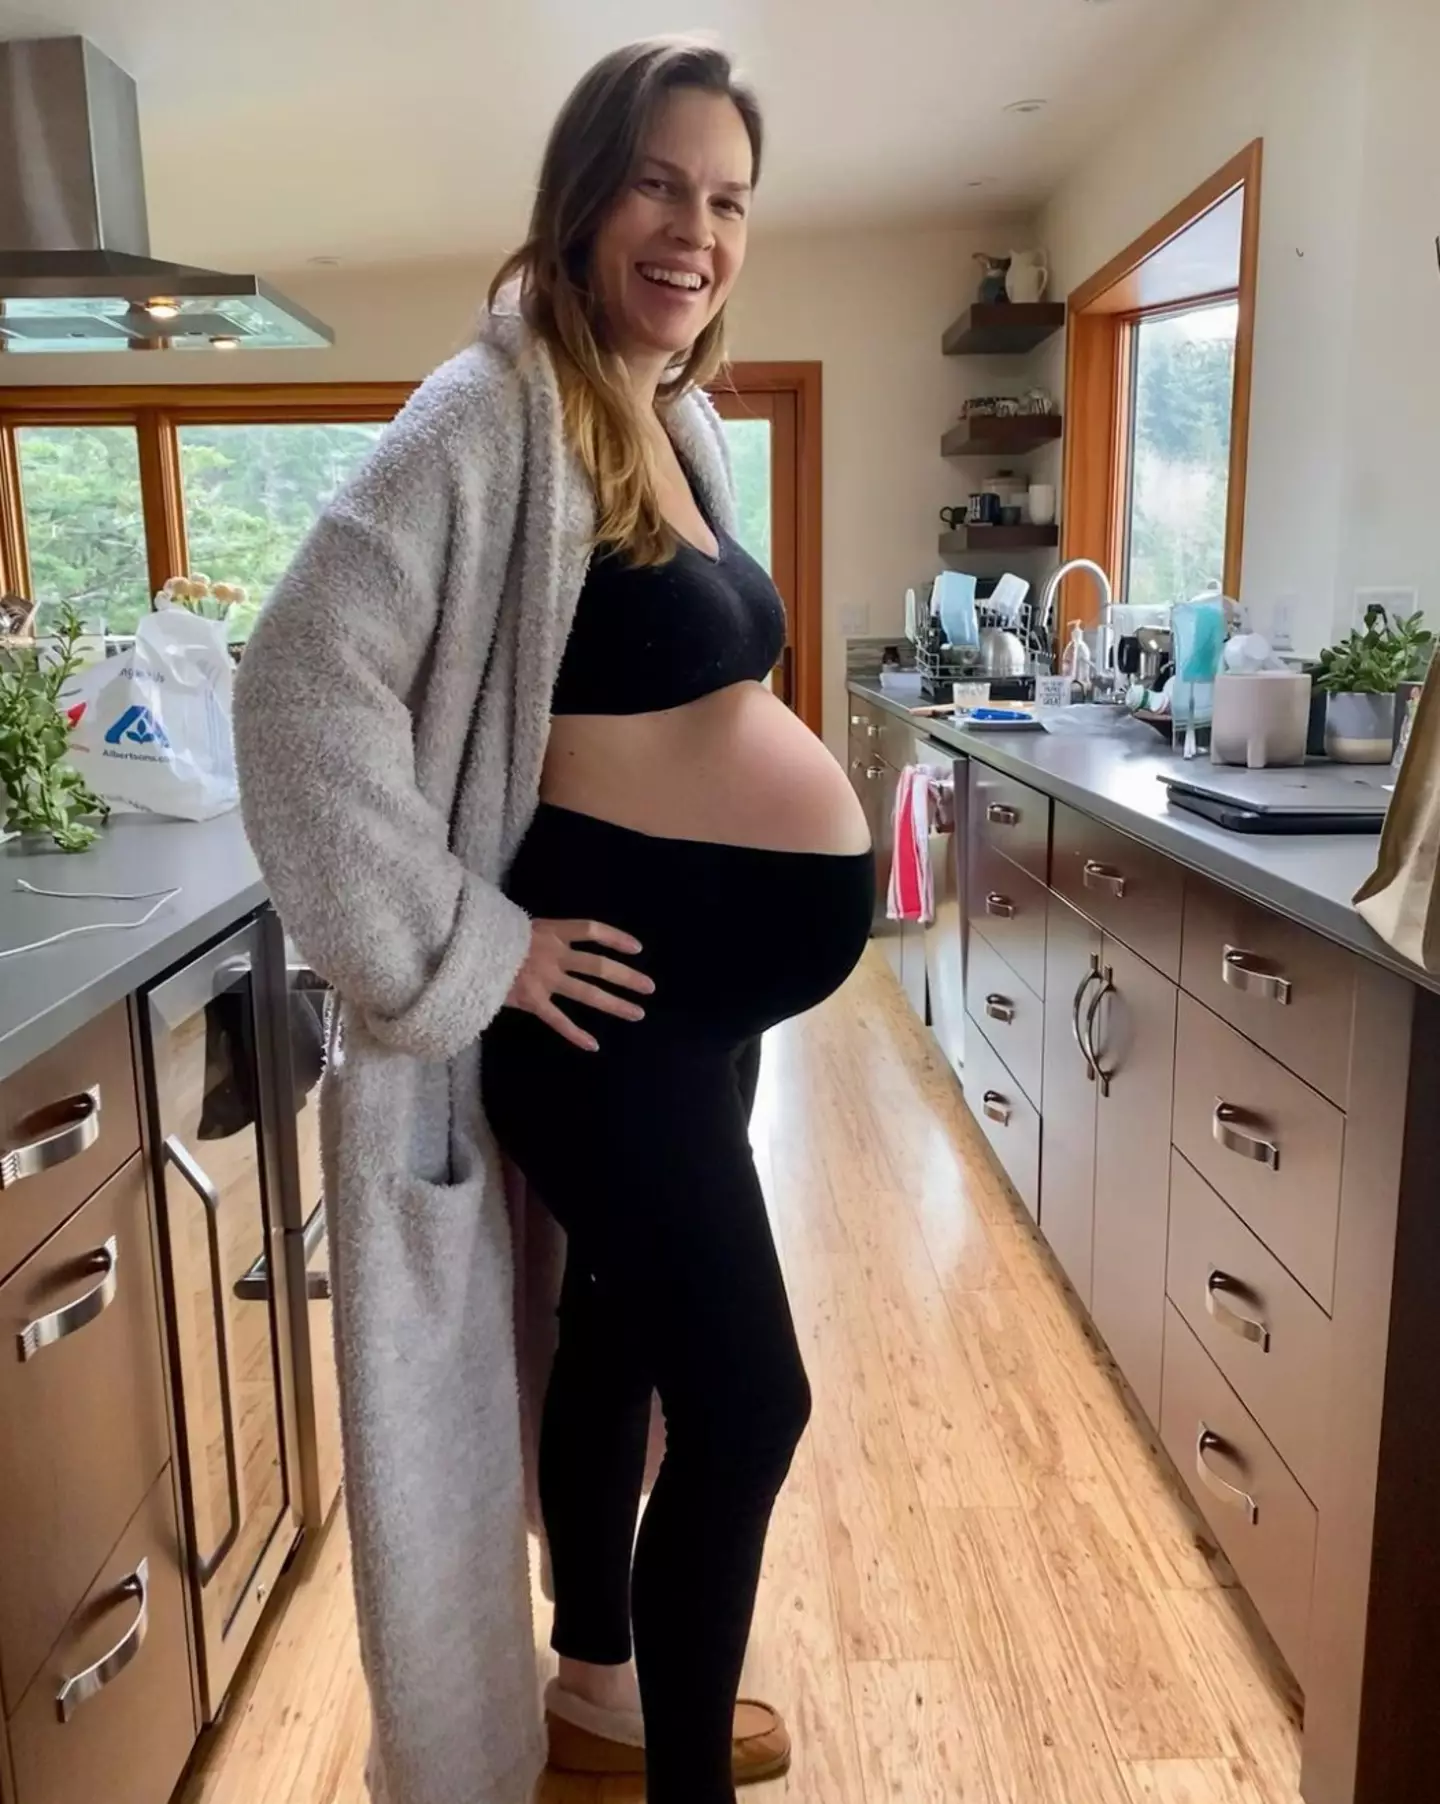 Hilary's shared snaps of her growing baby bump on Instagram.